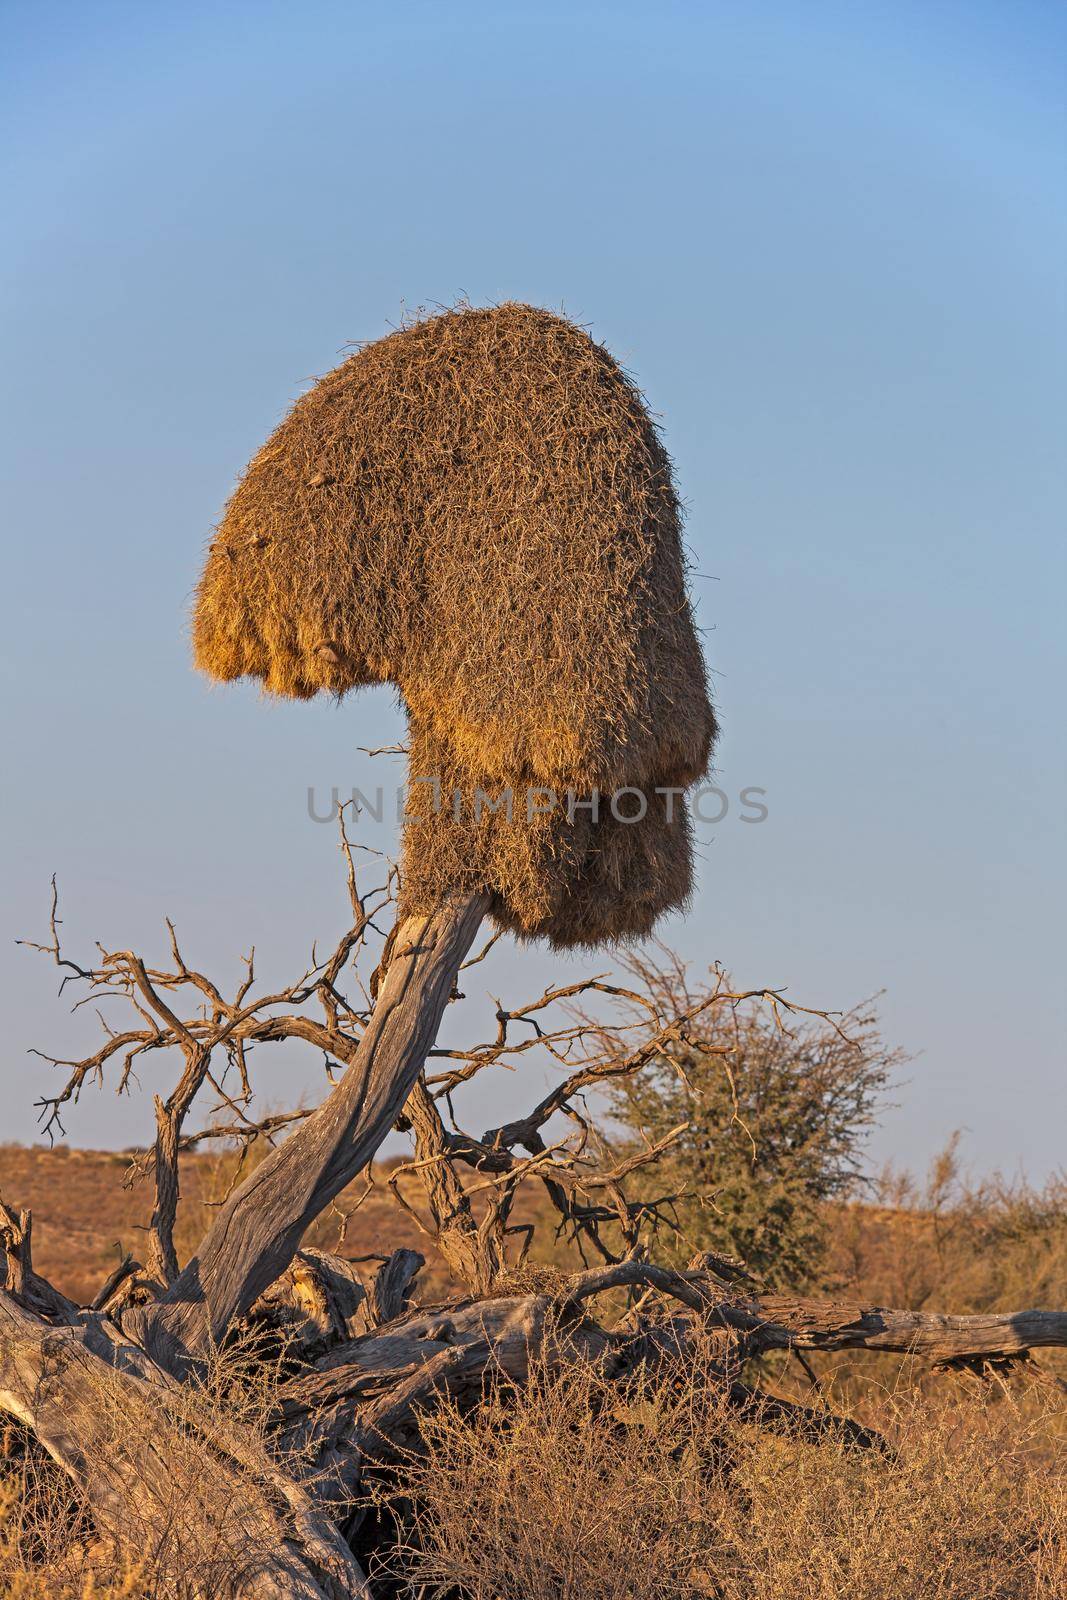 This haystack like nest house a large number of sparrow sized birds and may be used by many generations of birds.